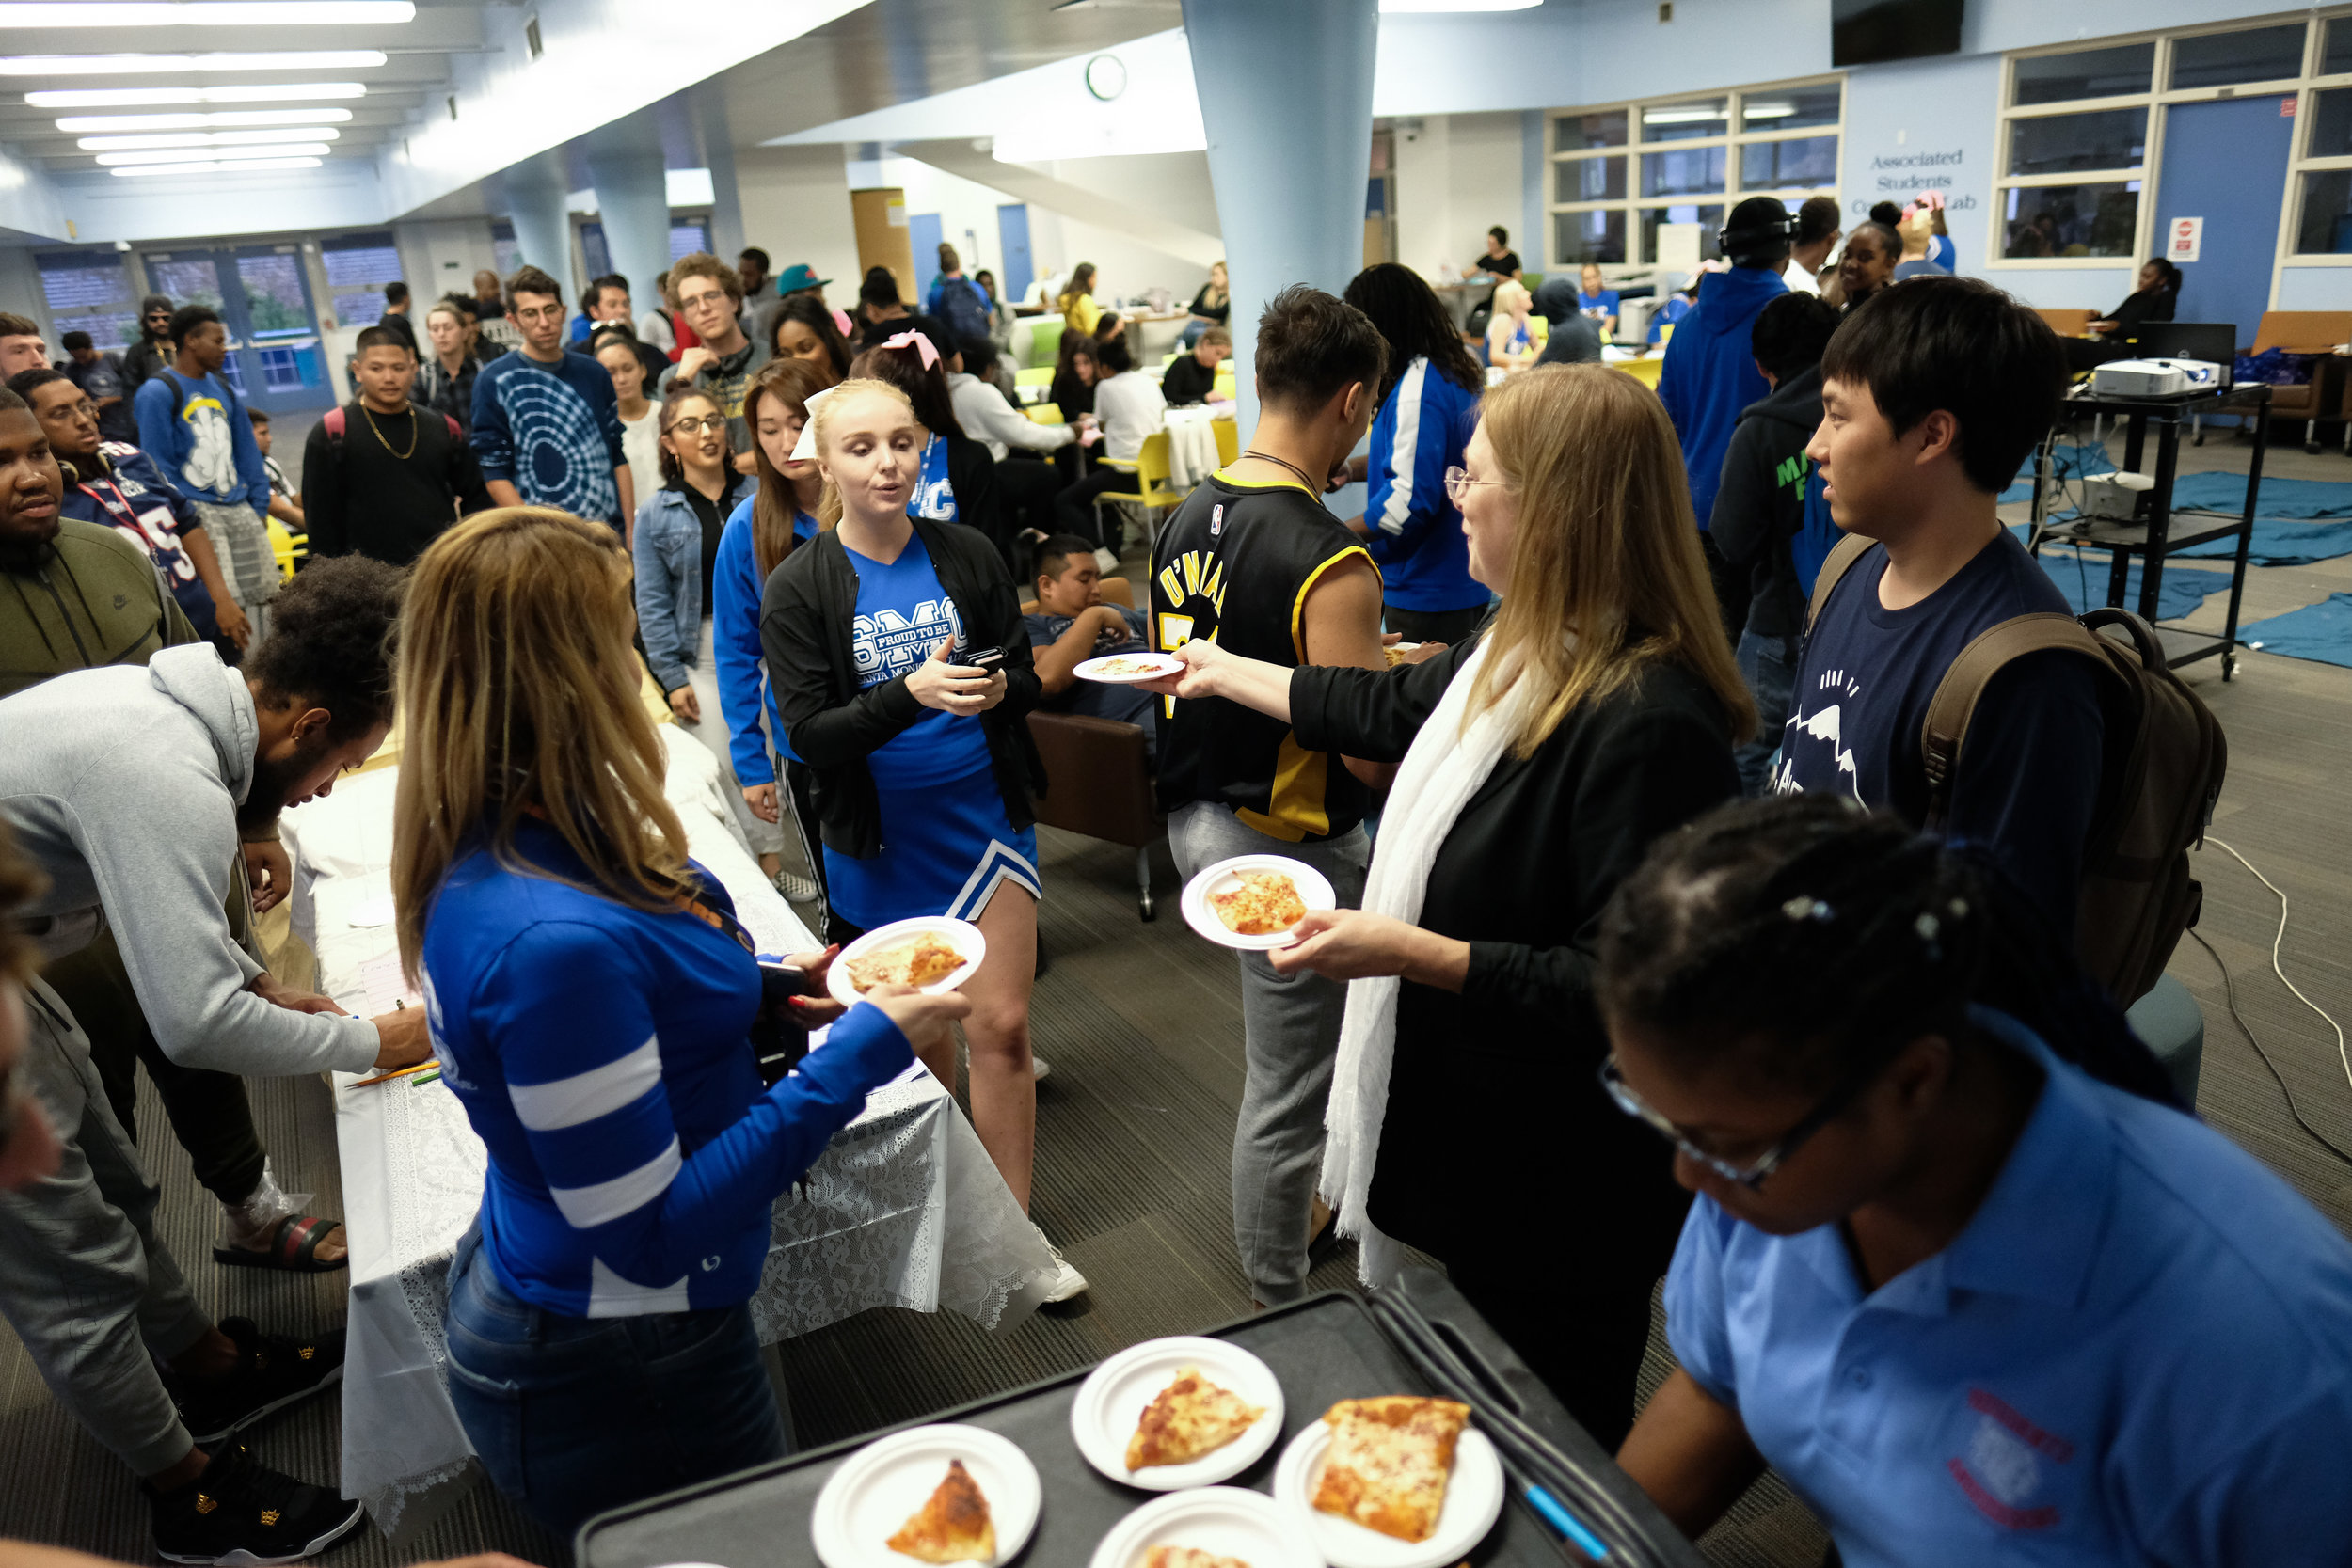  Dr.Nancy Grass, the Associate Dean of Student Life passes out pizza slices to the attendees of the first event to celebrate spirit week in the Cayton Center at Santa Monica College in Santa Monica, CALIF on October 30, 2017. (Photo by Jayrol San Jos